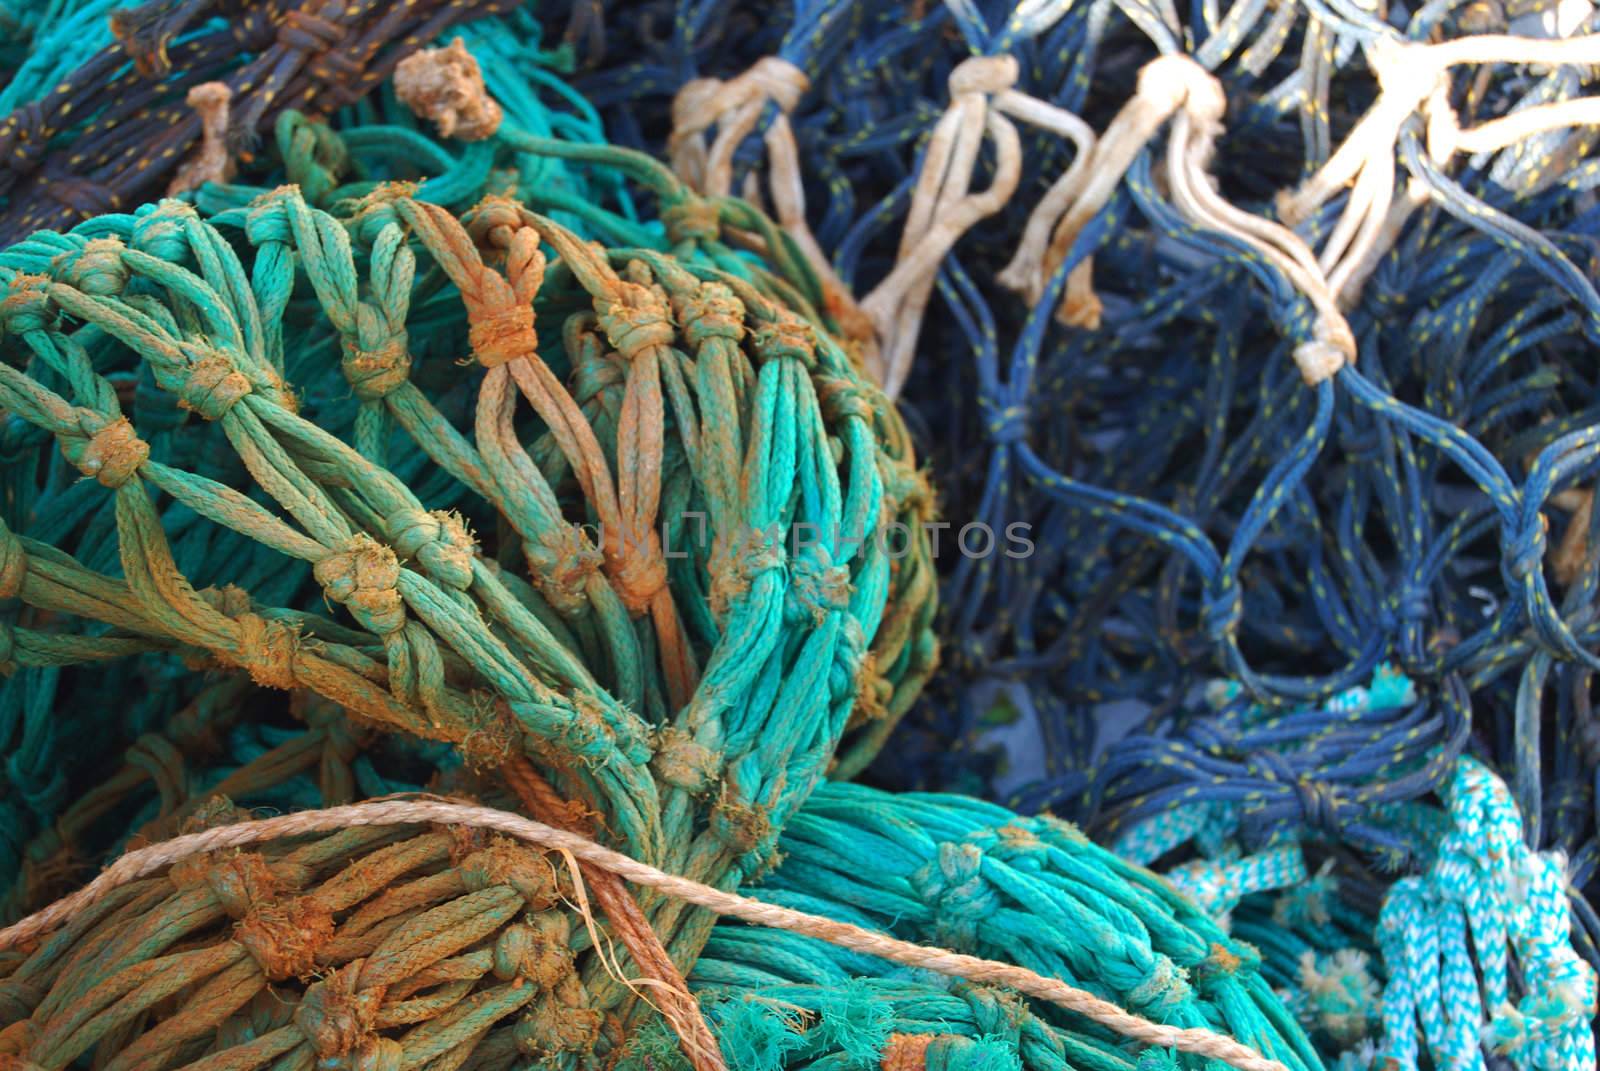 closeup of colorful fishing nets in a harbour